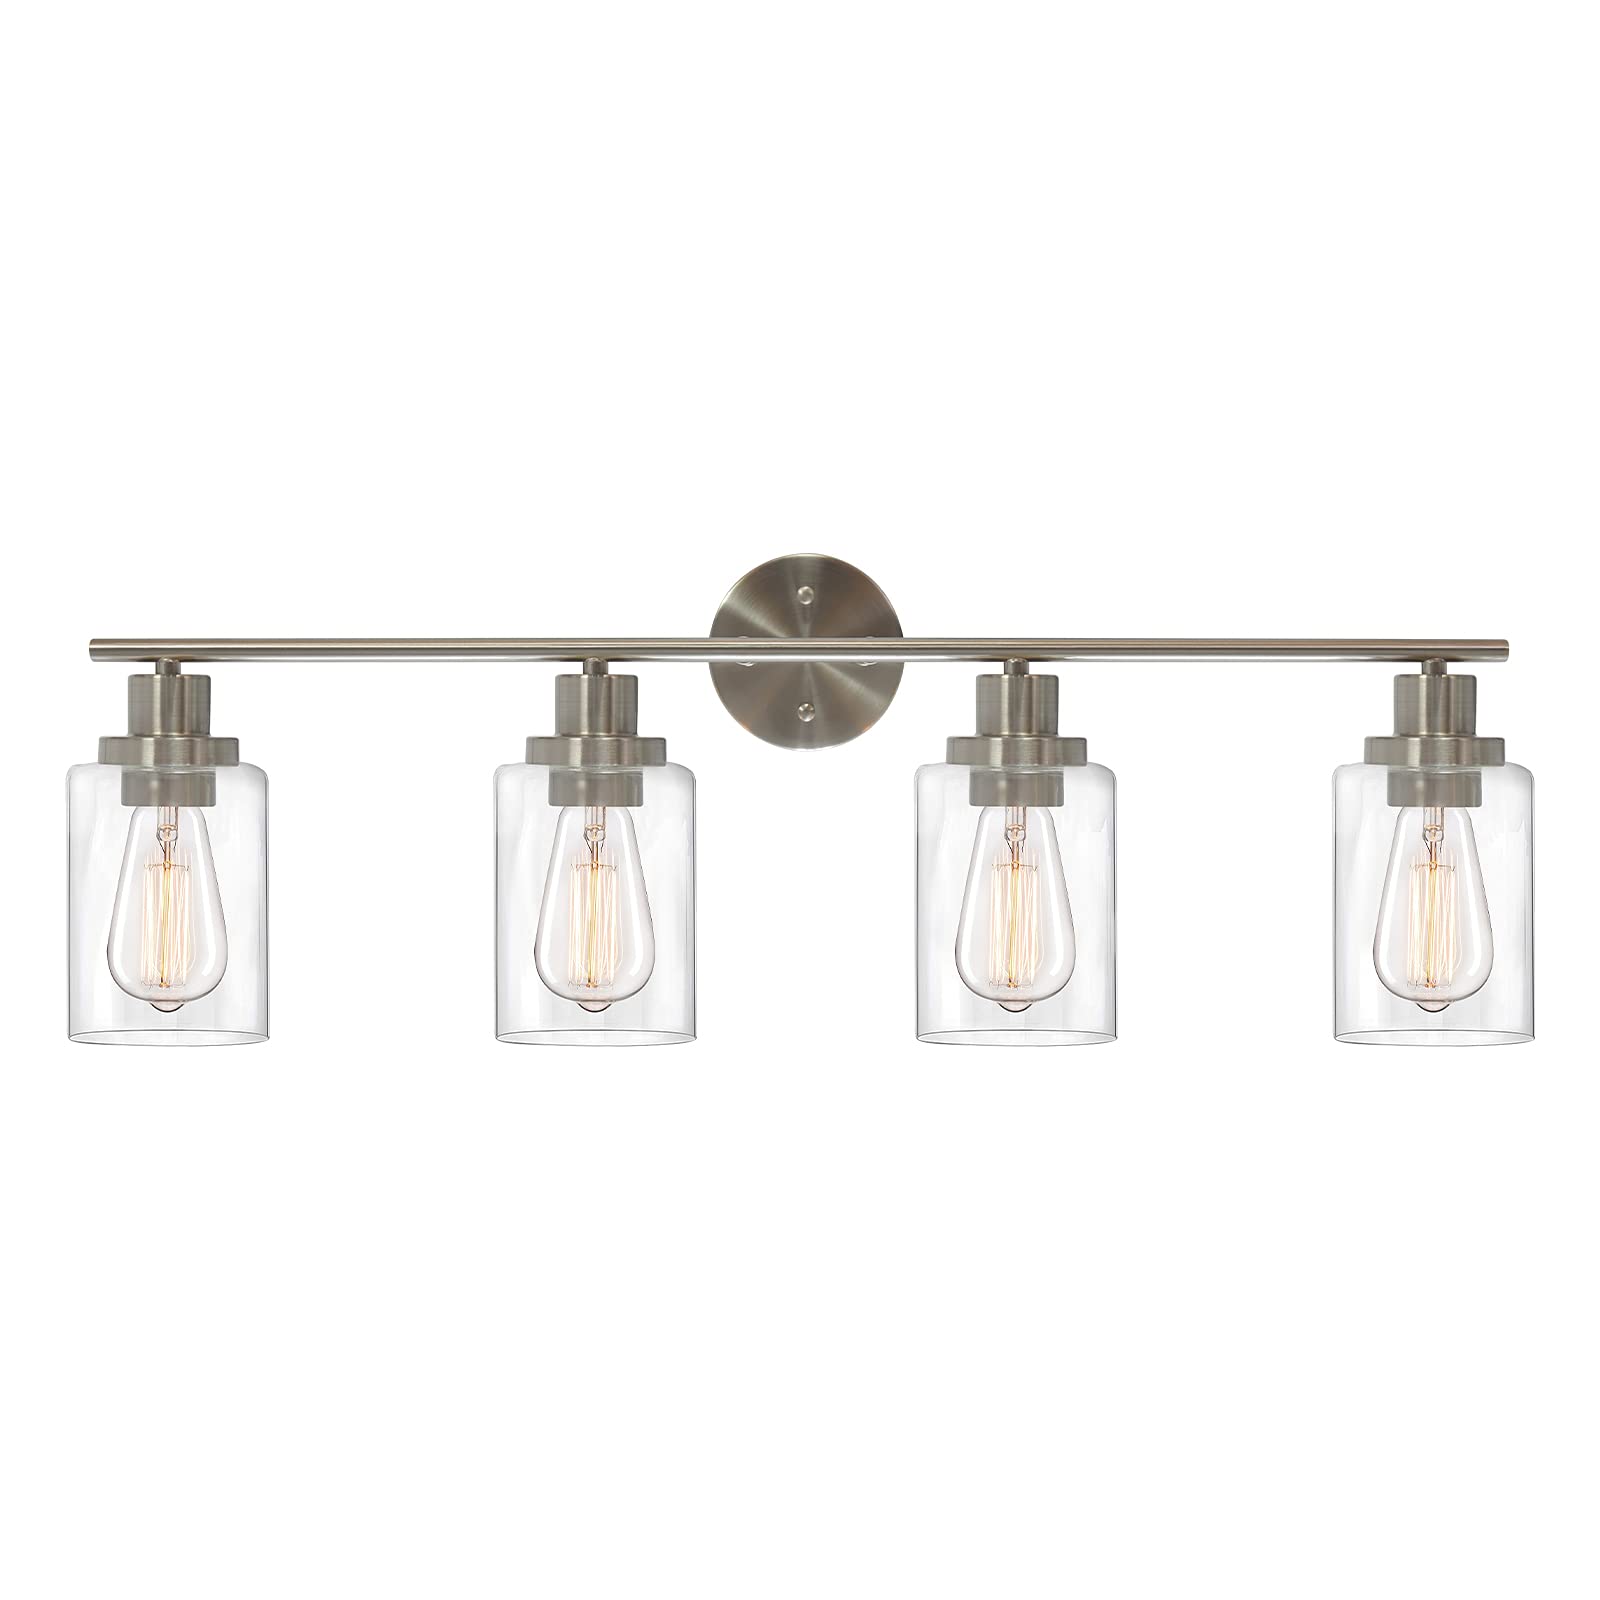 LauxaL Bathroom Lights Brushed Nickel 4 Light Modern Vanity Lighting with Glass Shade, Industrial Vintage Bath Porch Wall Light Fixture Farmhouse Wall Lamp for Kitchen Dining Room Living Room Mirror